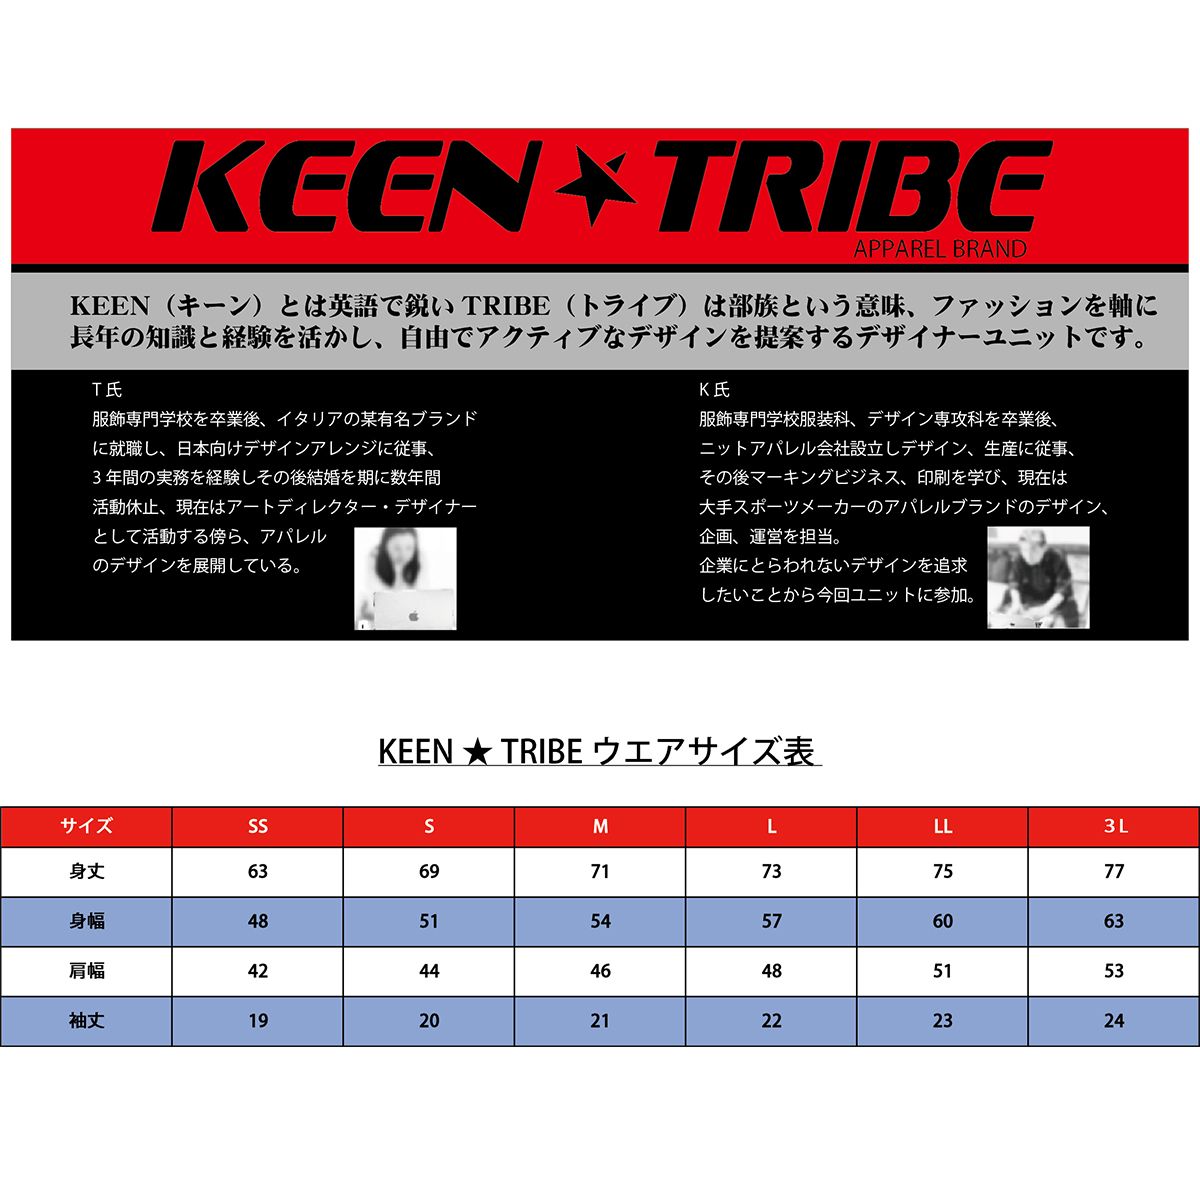 KEEN ★ TRIBE　KT-8(受注生産)